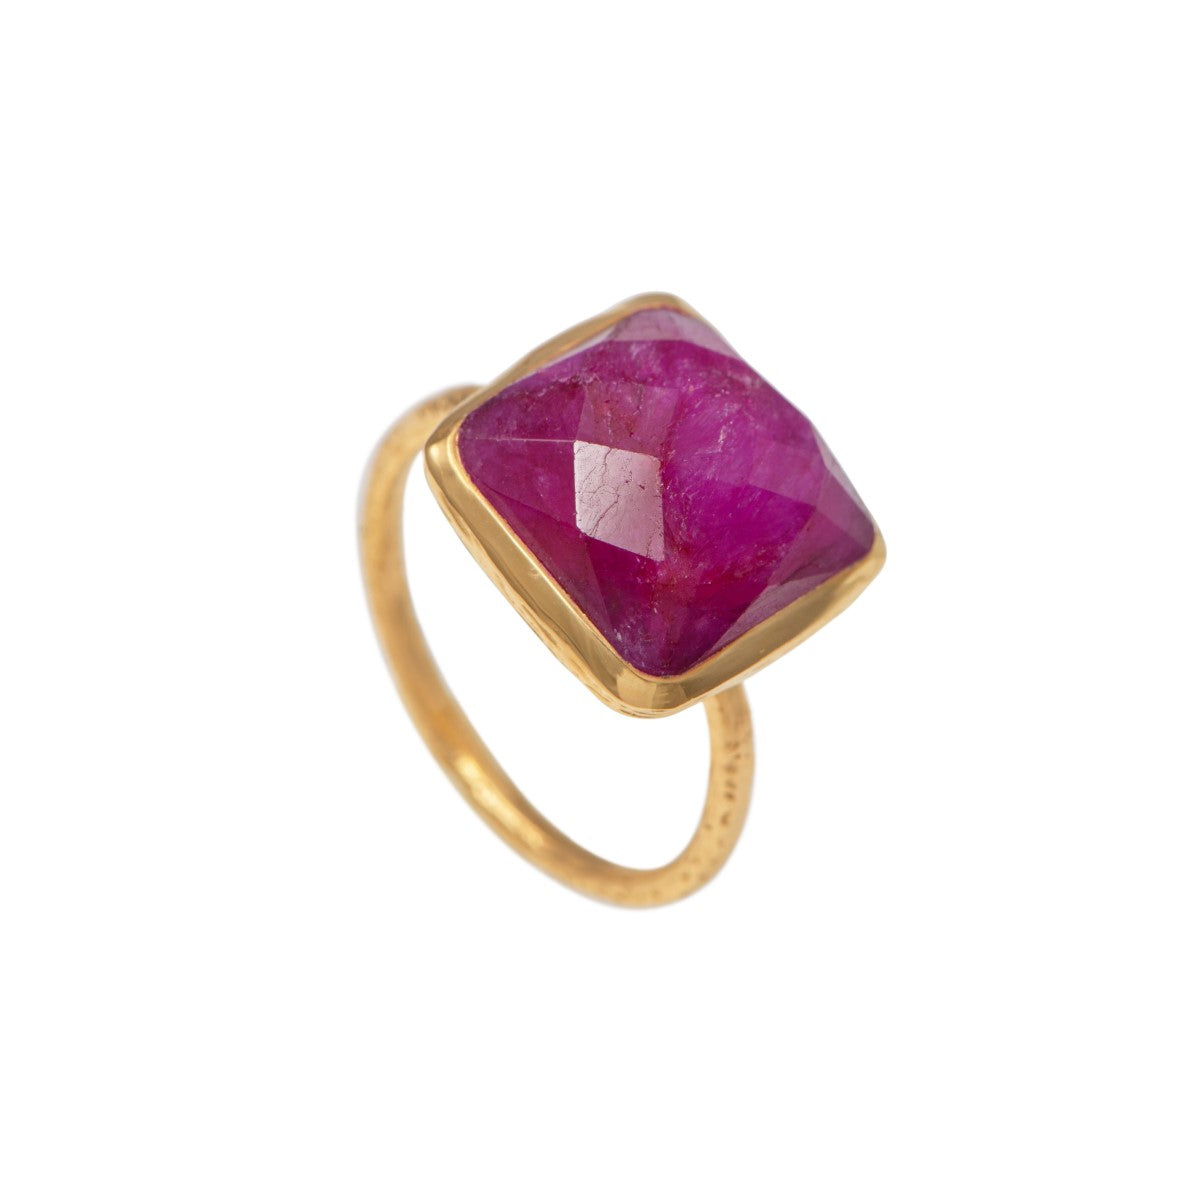 Gold Plated Silver Ring with Square Semiprecious Stone - Ruby Quartz